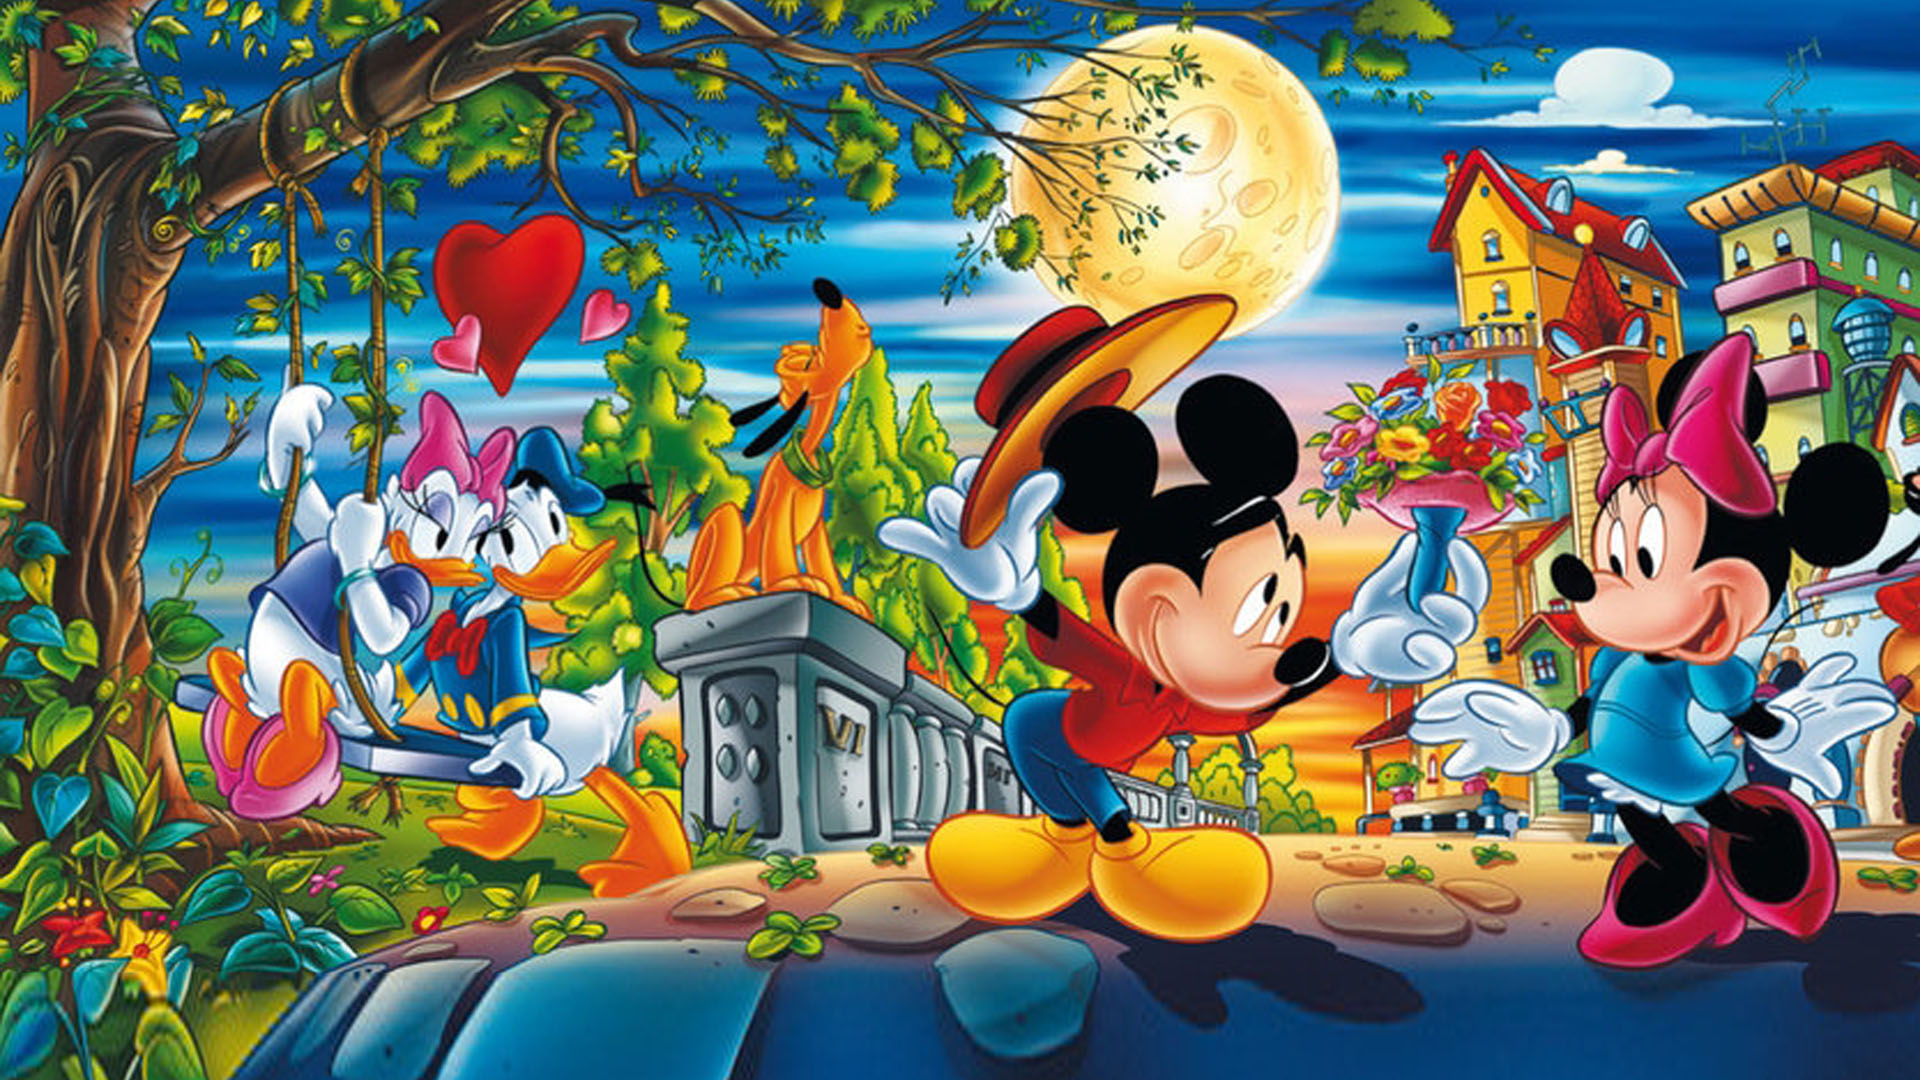 Valentine Day Cartoons Mickey With Minnie Mouse And Donald With Daisy Duck Disney Pictures Love Couple Wallpaper Hd 1920x1080 Wallpapers13 Com